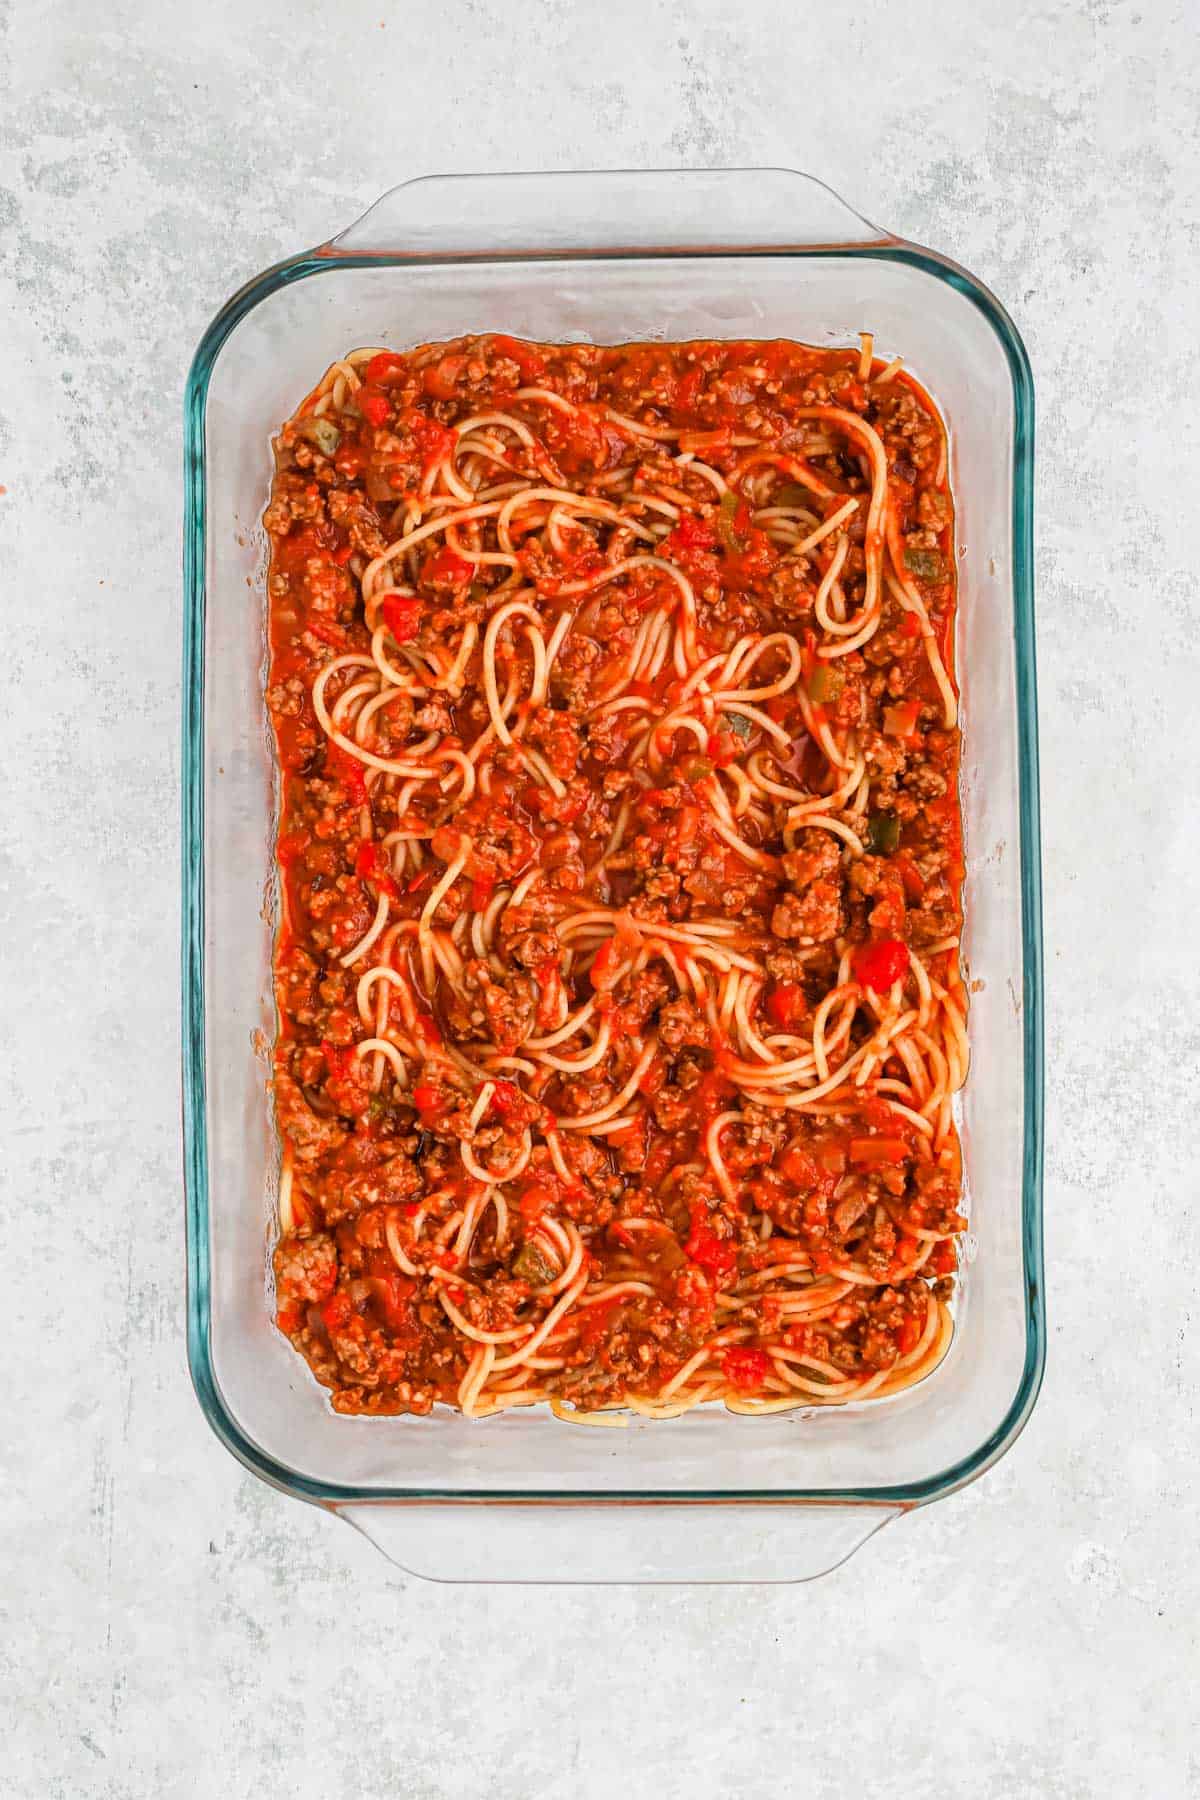 Spaghetti and meat sauce mixed together in a casserole dish.